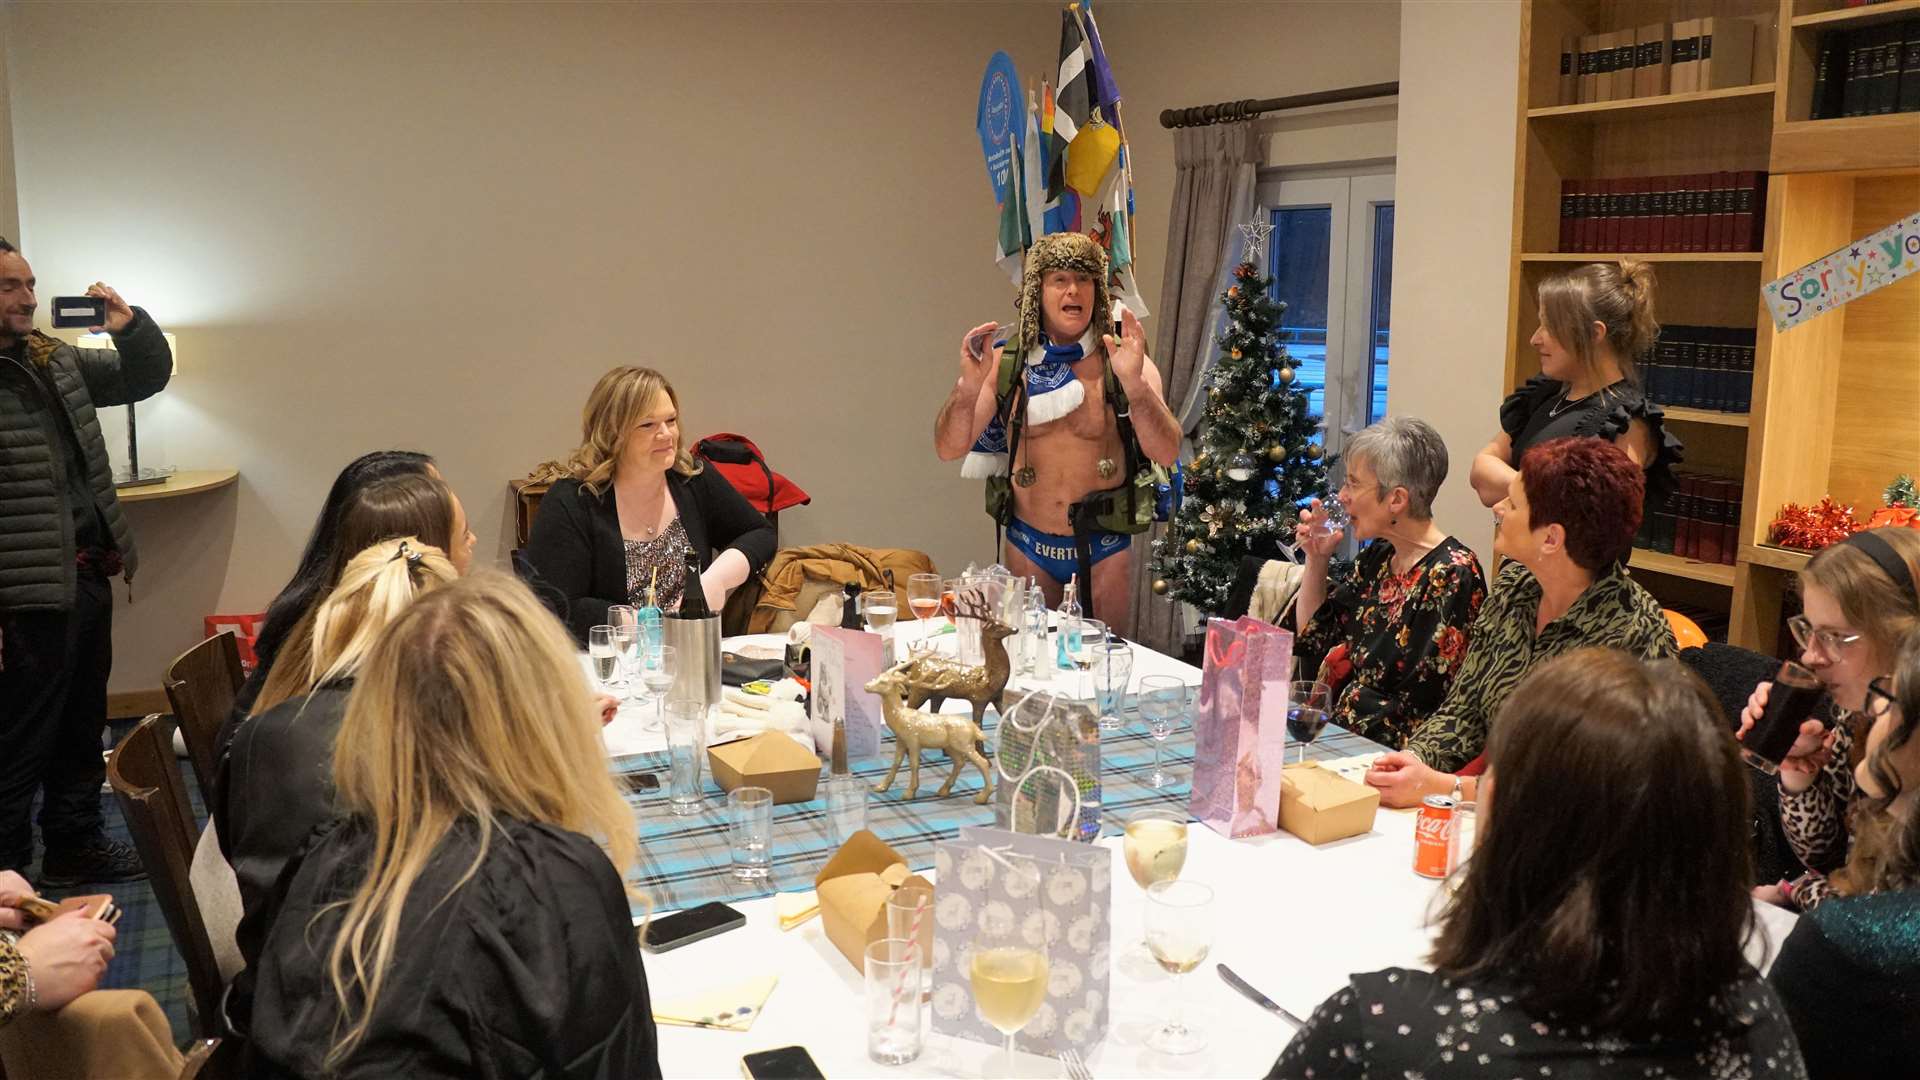 A party of women were at the Norseman Hotel having a special celebratory bash when Speedo Mick popped in to raise their spirits even more. Picture: DGS